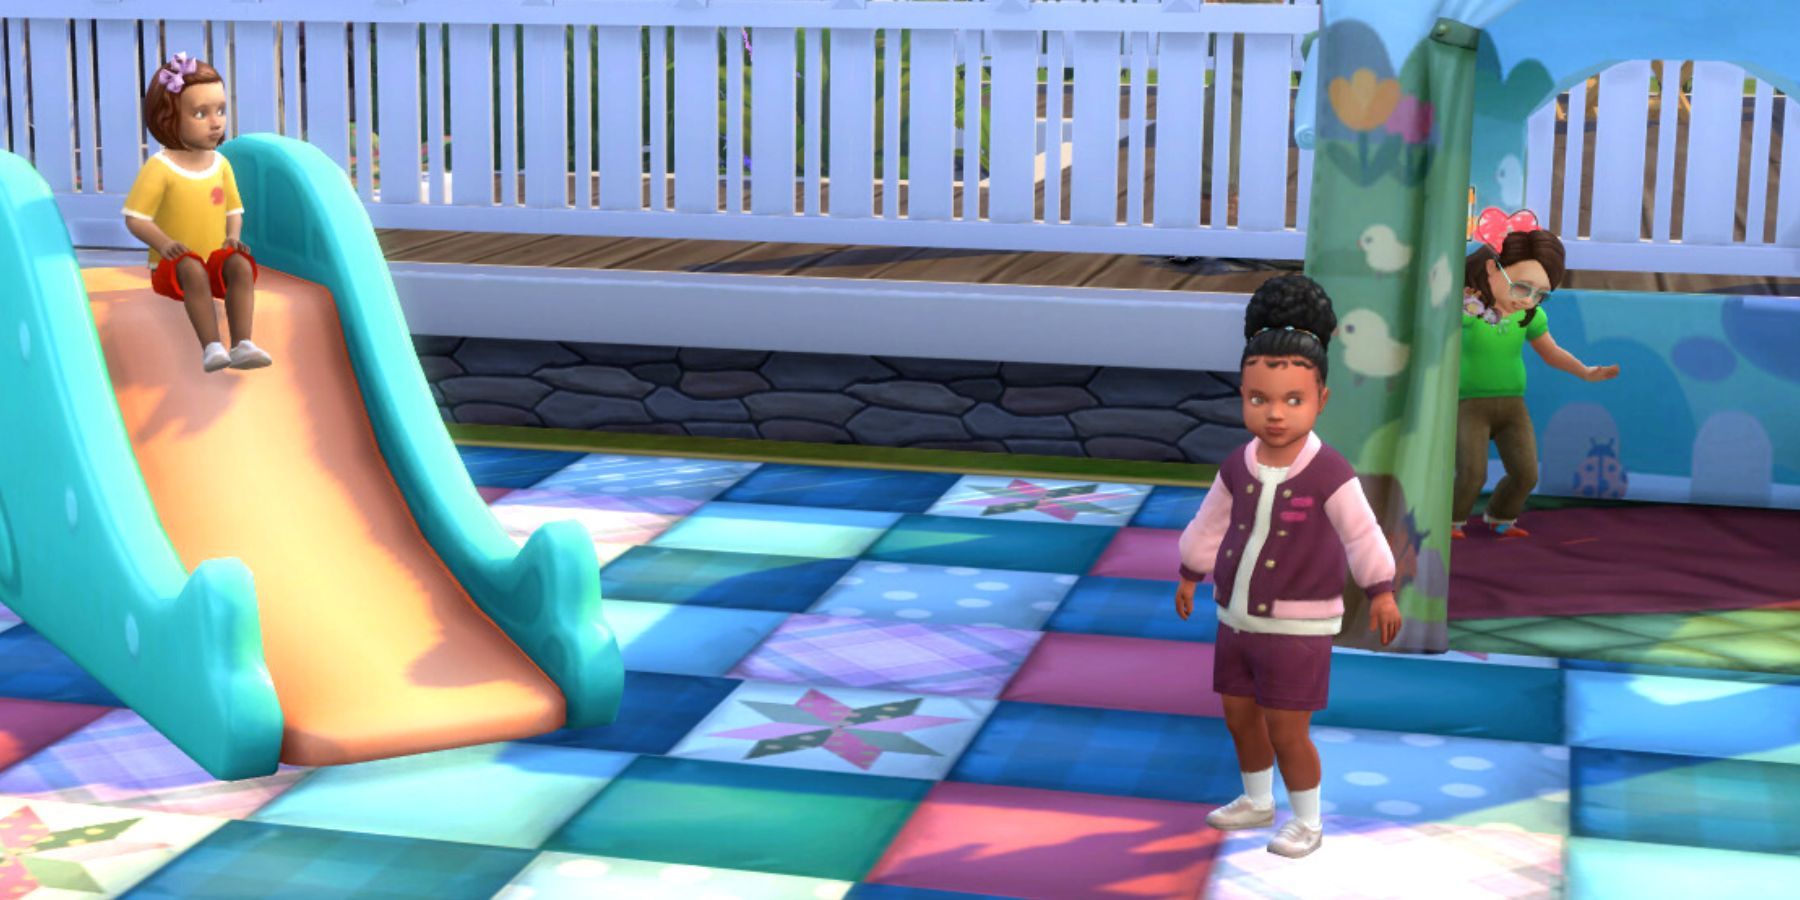 The Sims 4: How To Host A Toddler Play Date